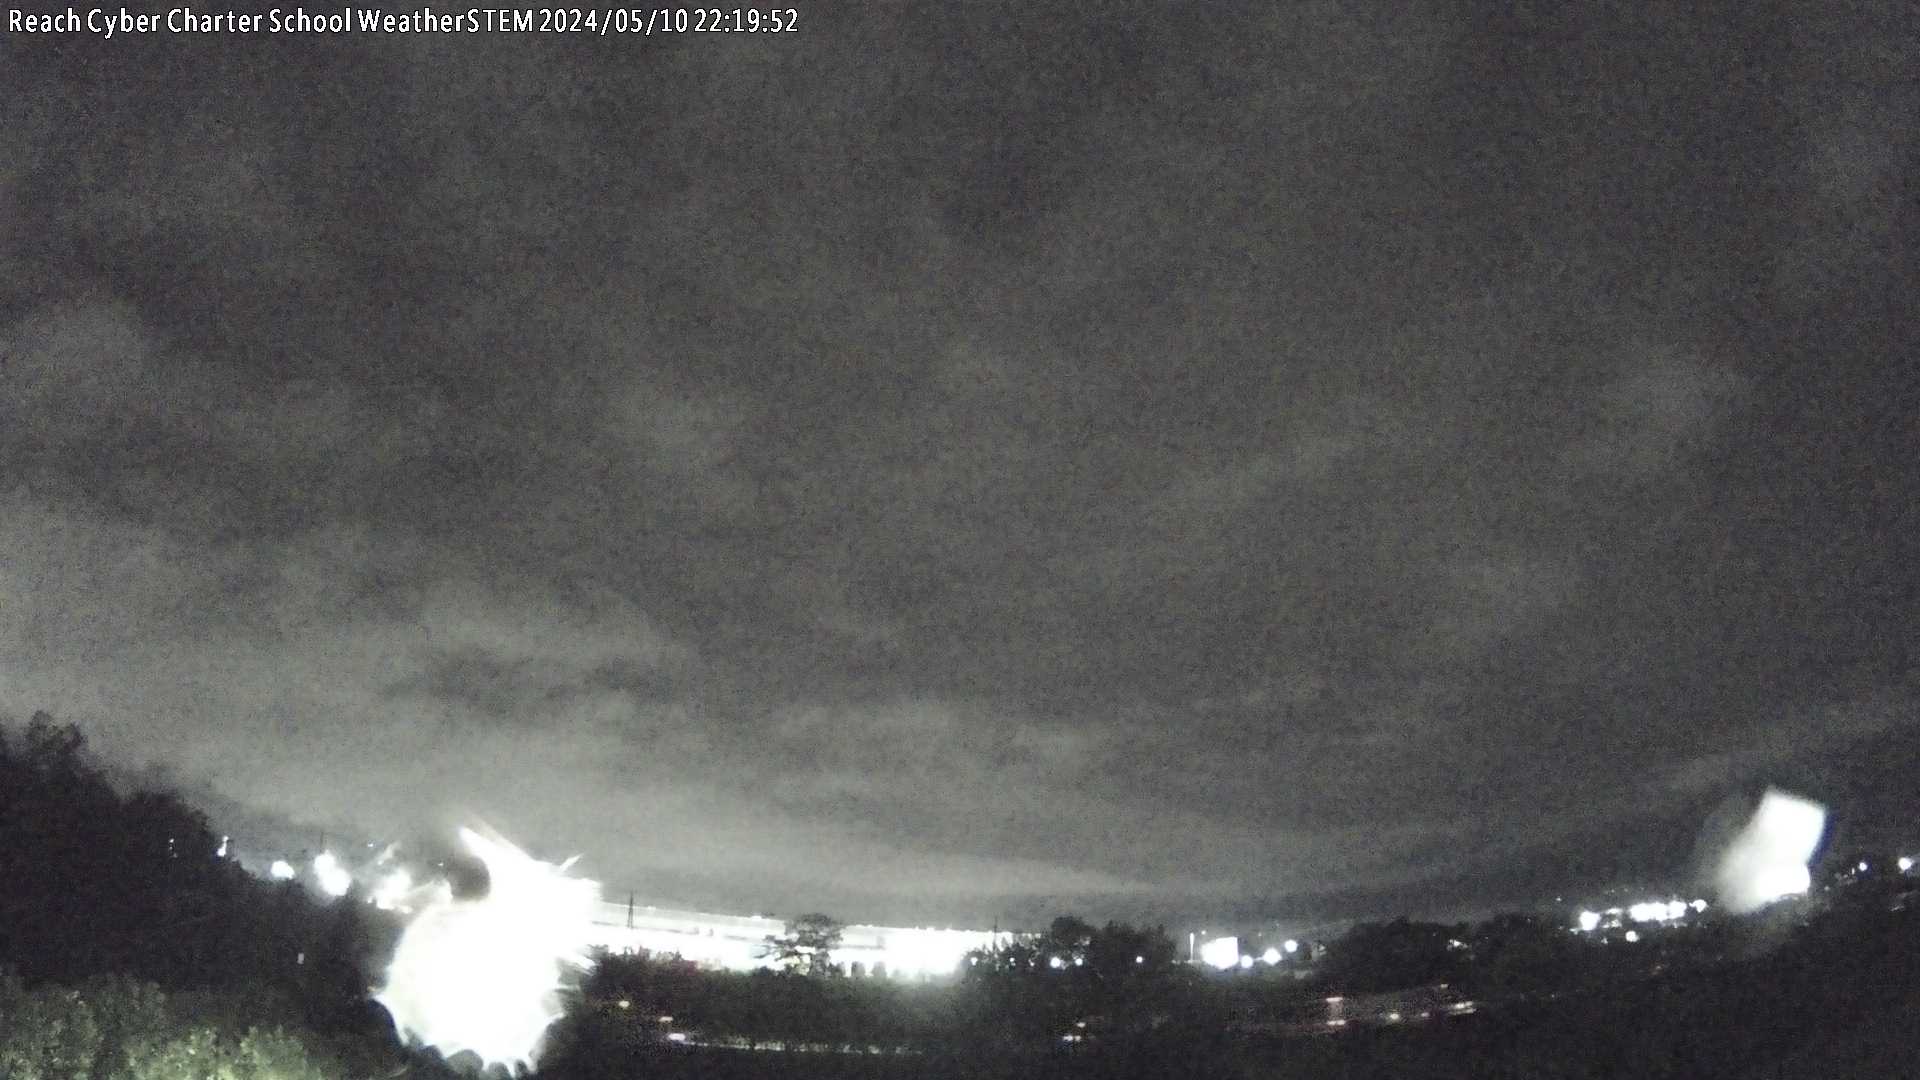 LIVE: WeatherSTEM Cloud Camera RCCSWxSTEM in Dauphin County, Pennsylvania PA at Reach Cyber Charter School